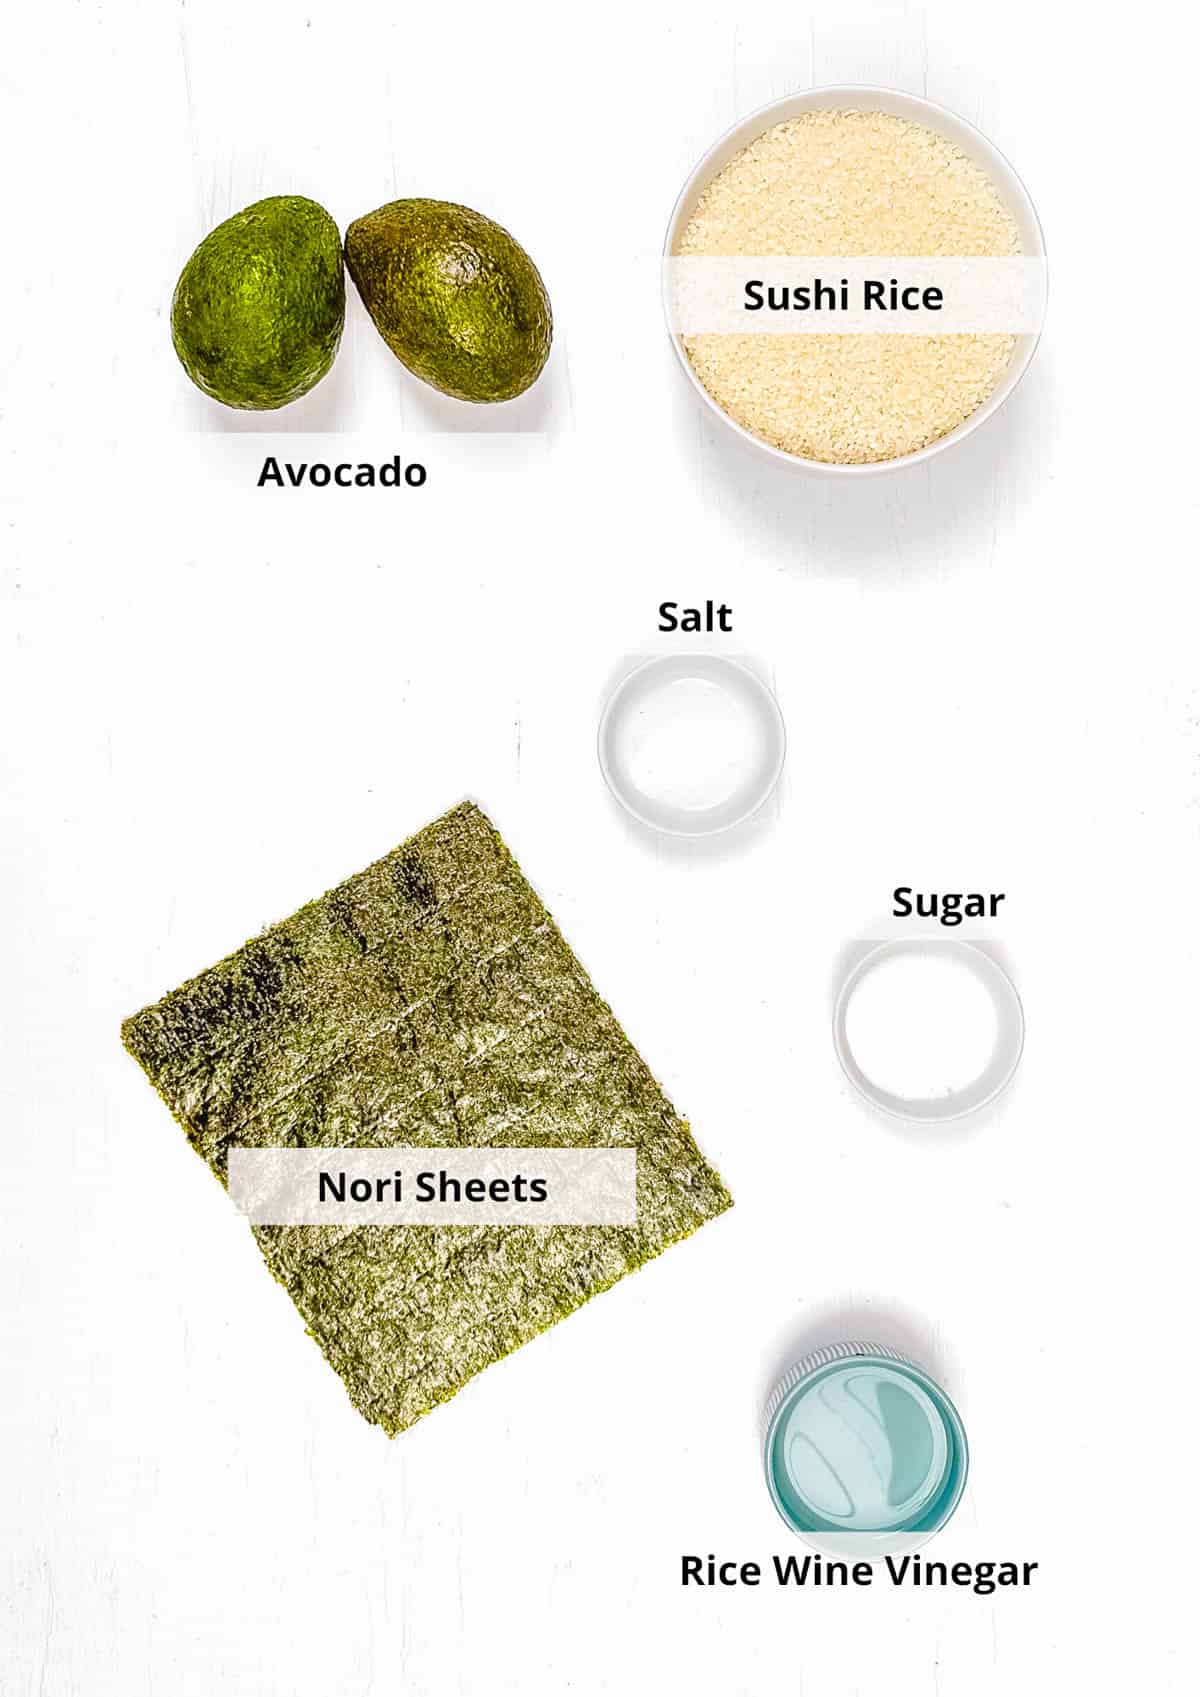 Ingredients for vegan avocado sushi rolls recipe on a white background.